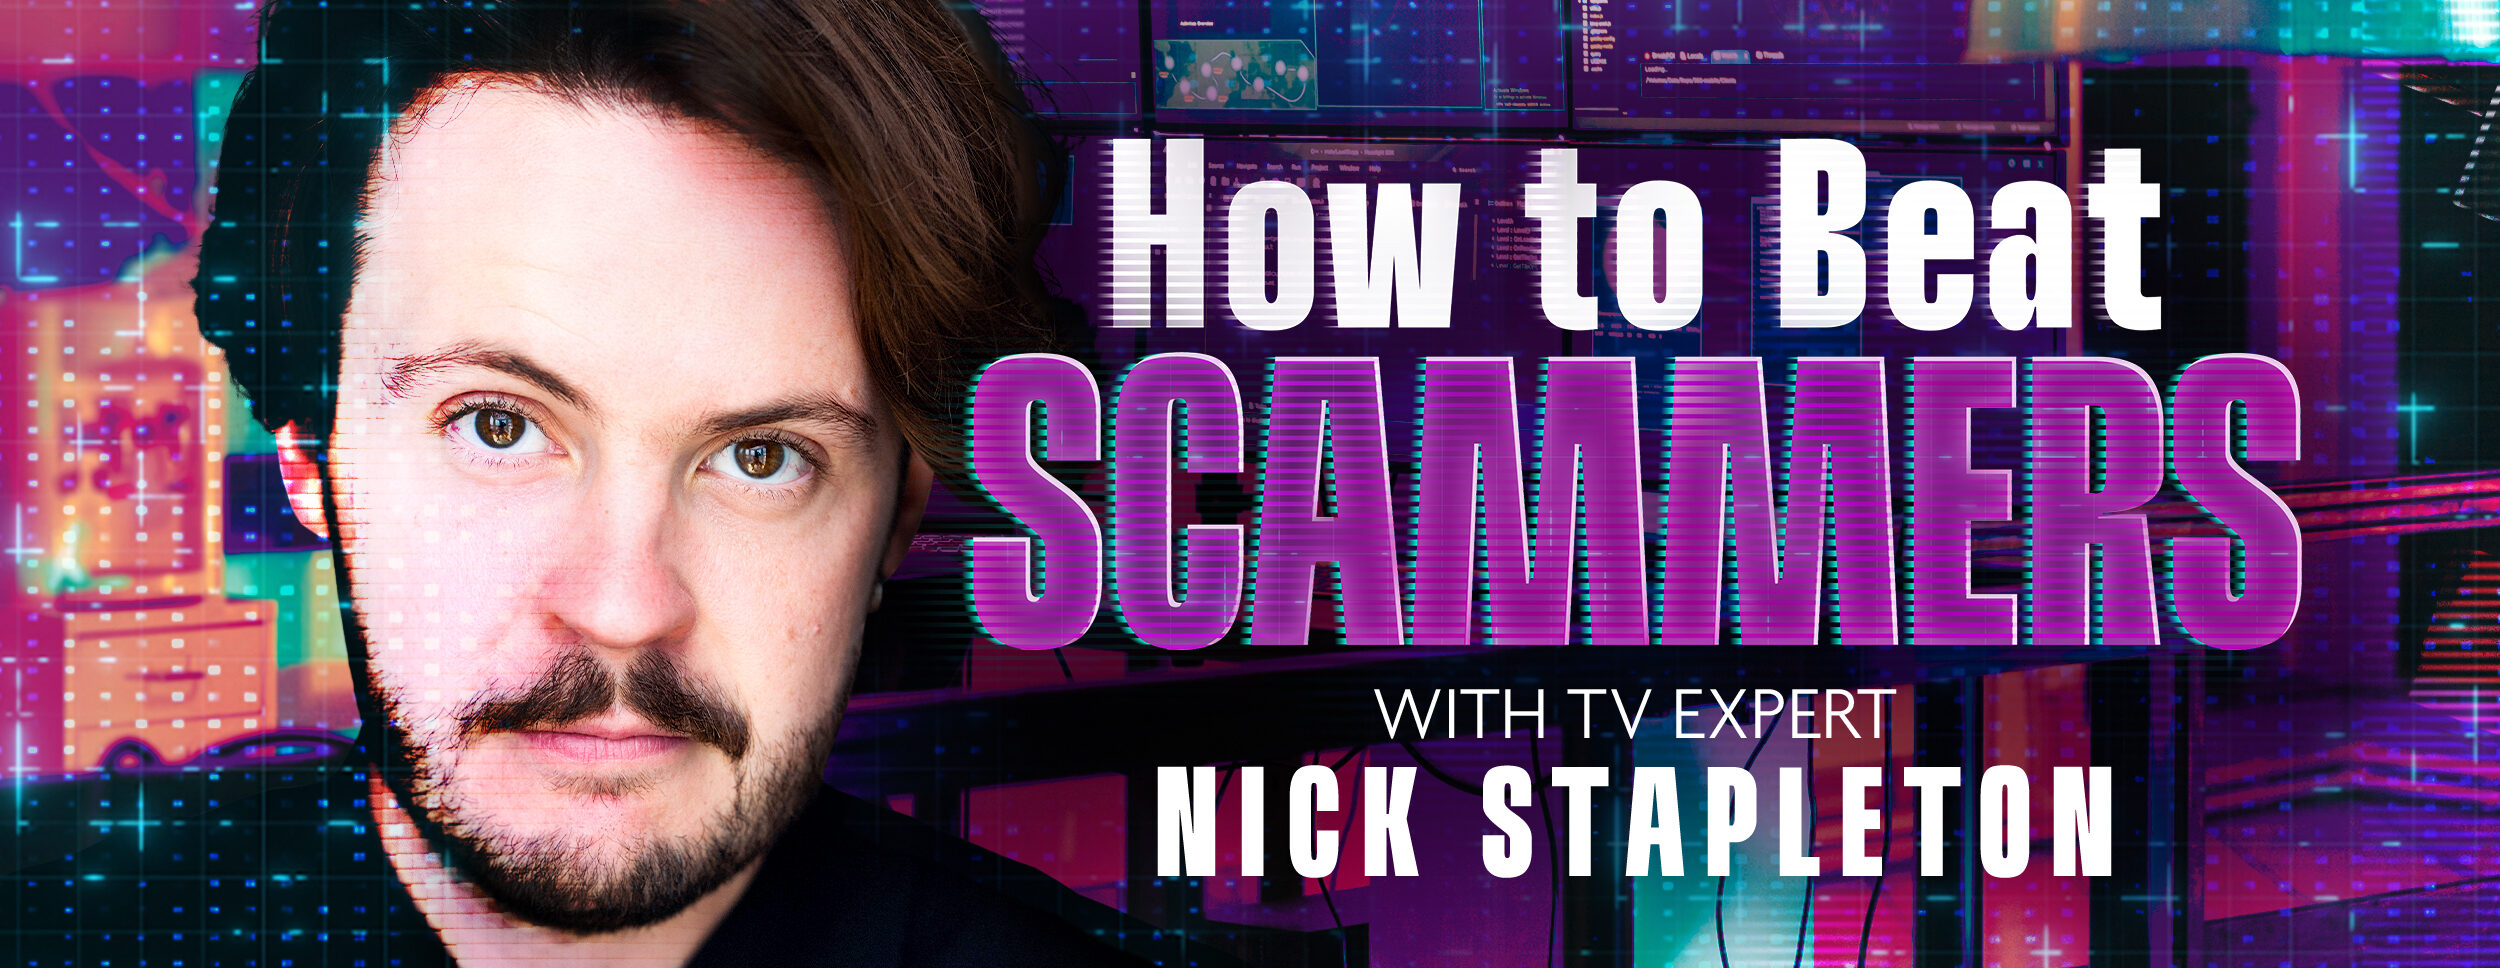 Nick Stapleton – How to beat scammers